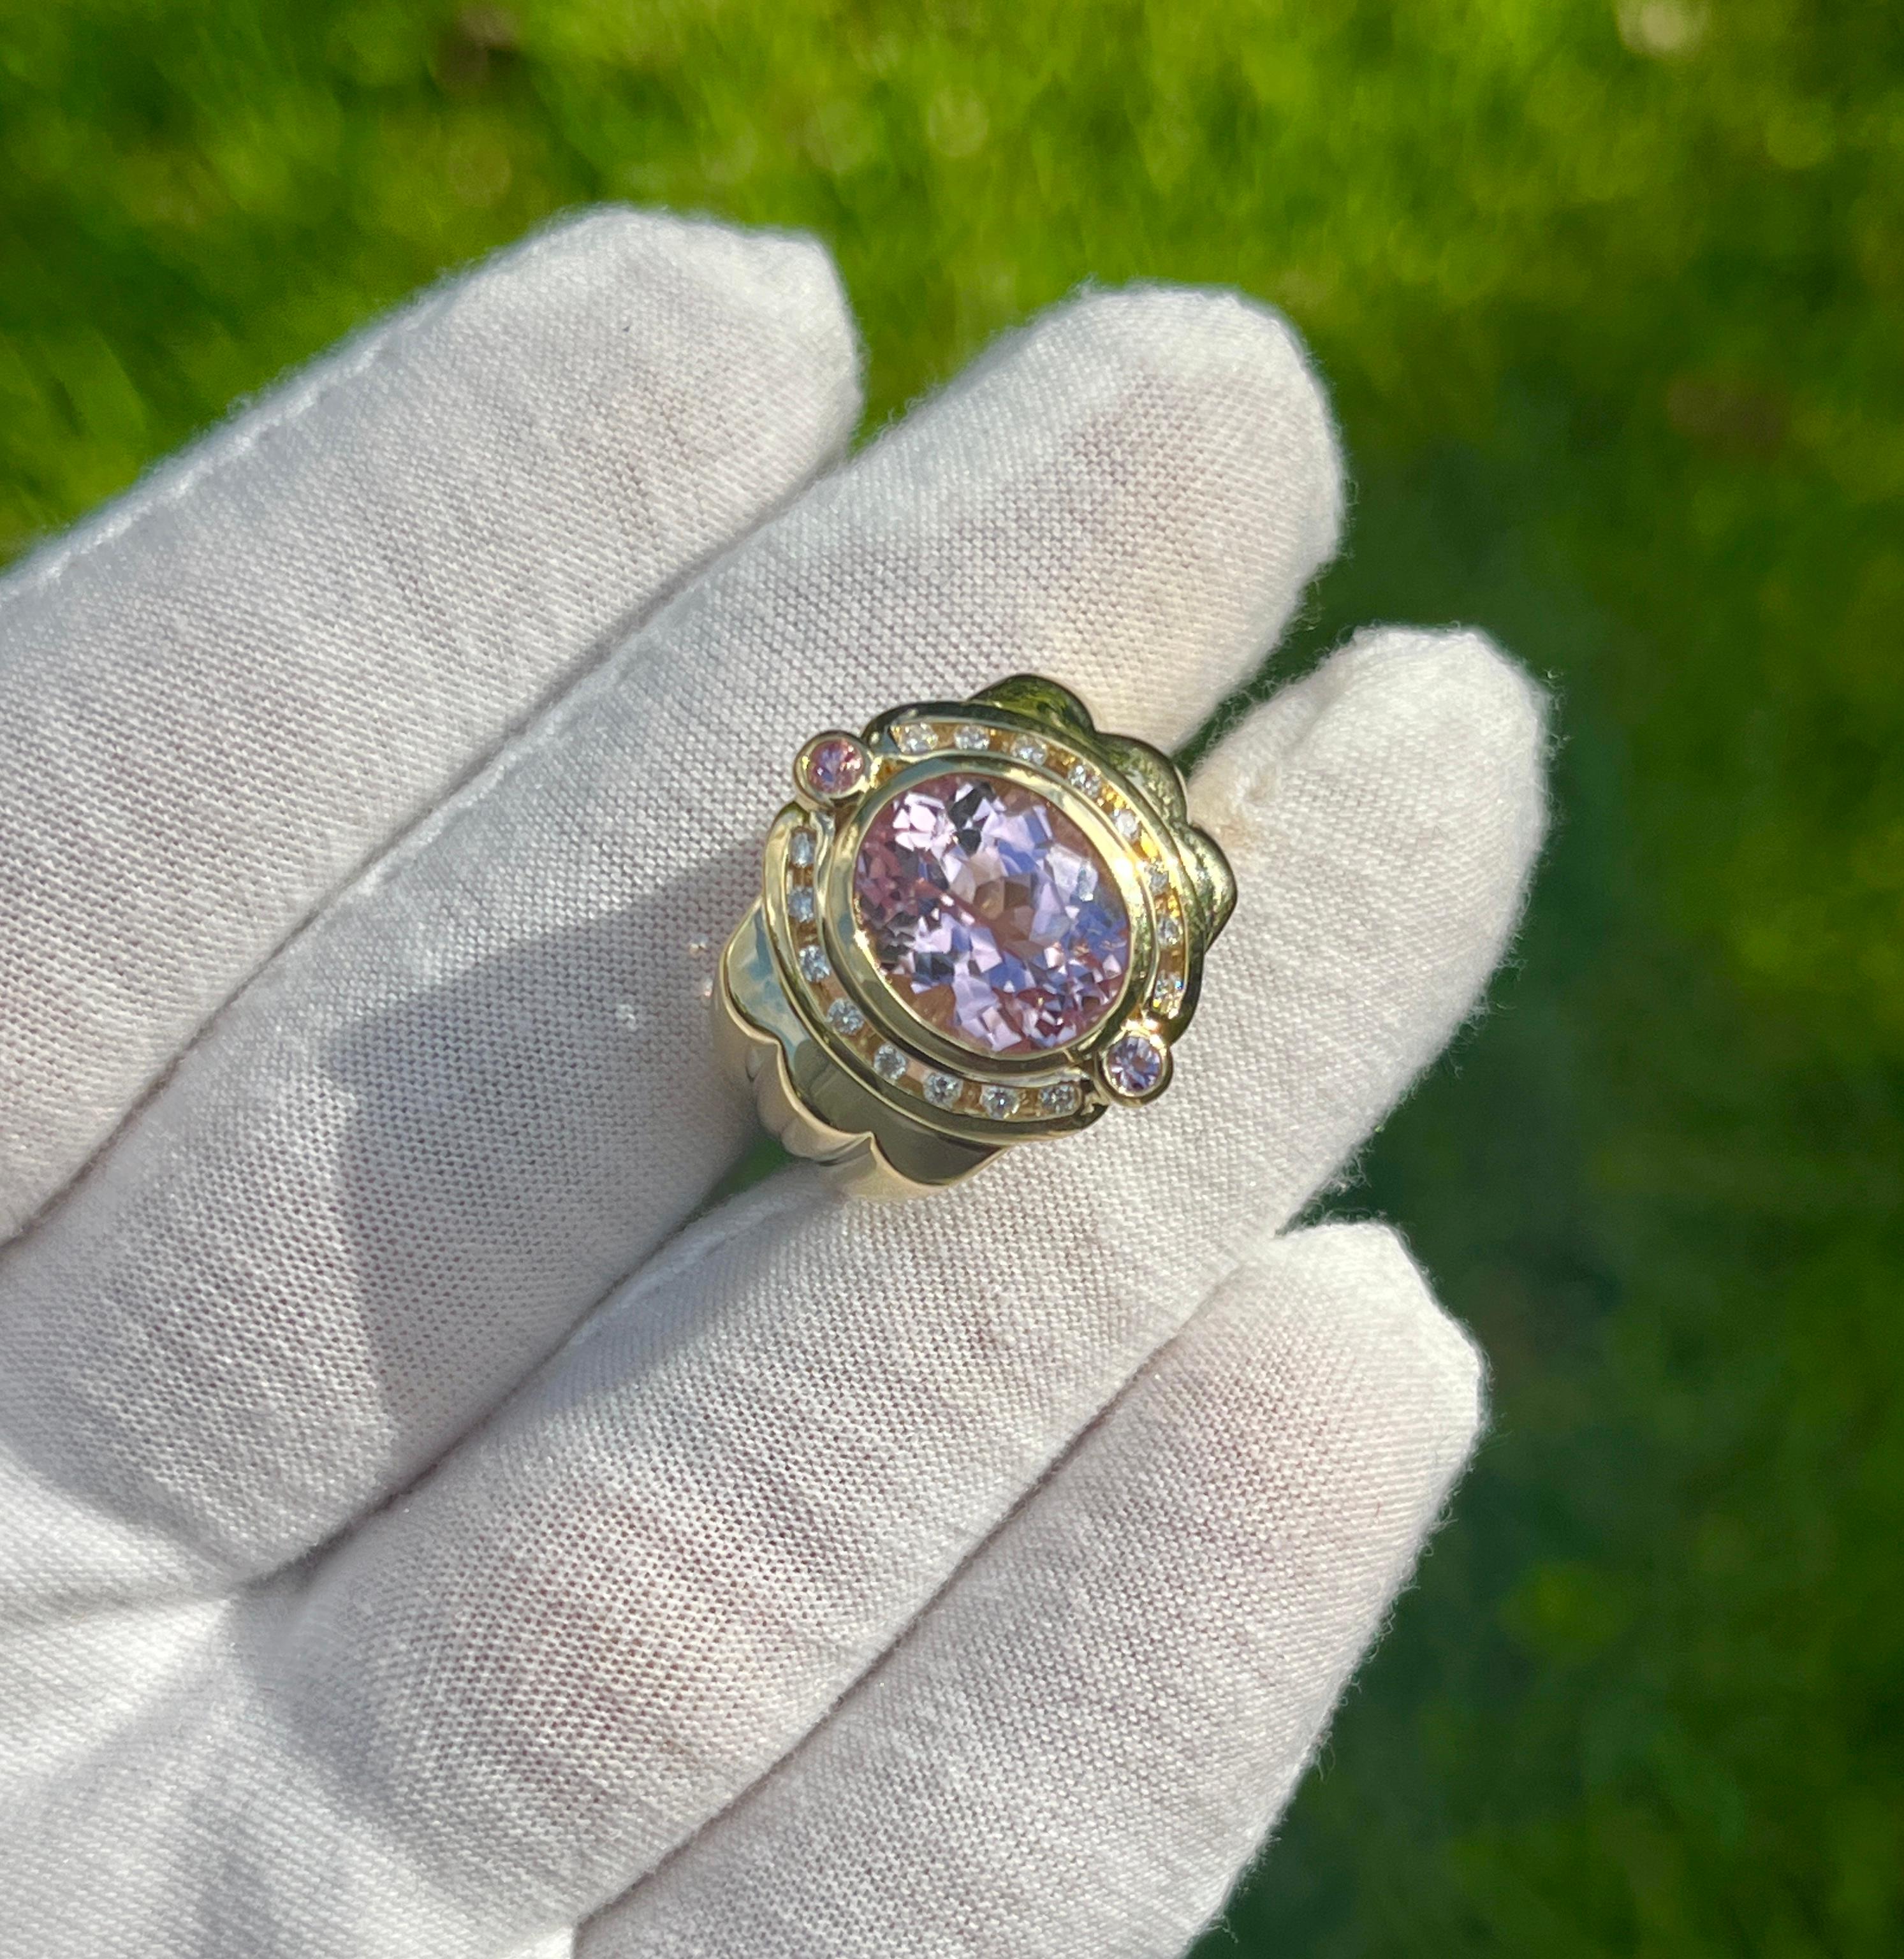 18K Gold Vintage Retro Regal Ring With Pink Kunzite and Diamond Halo For Sale 1